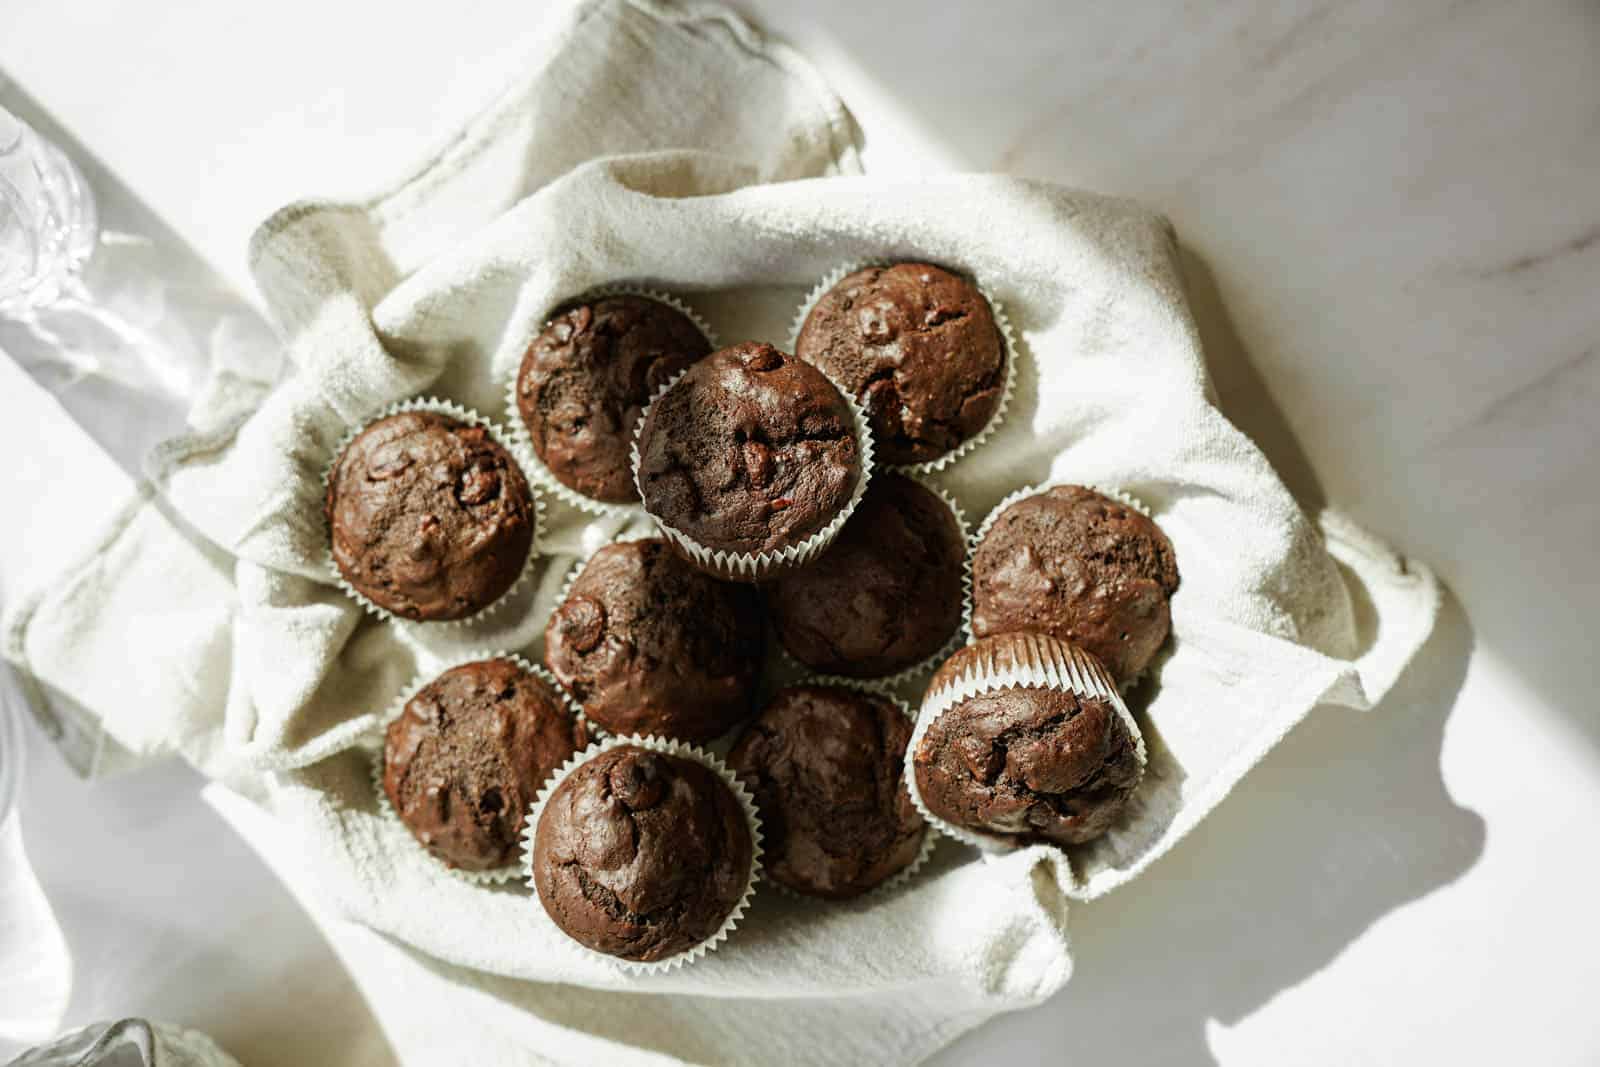 Chocolate Avocado Muffins in a basket.